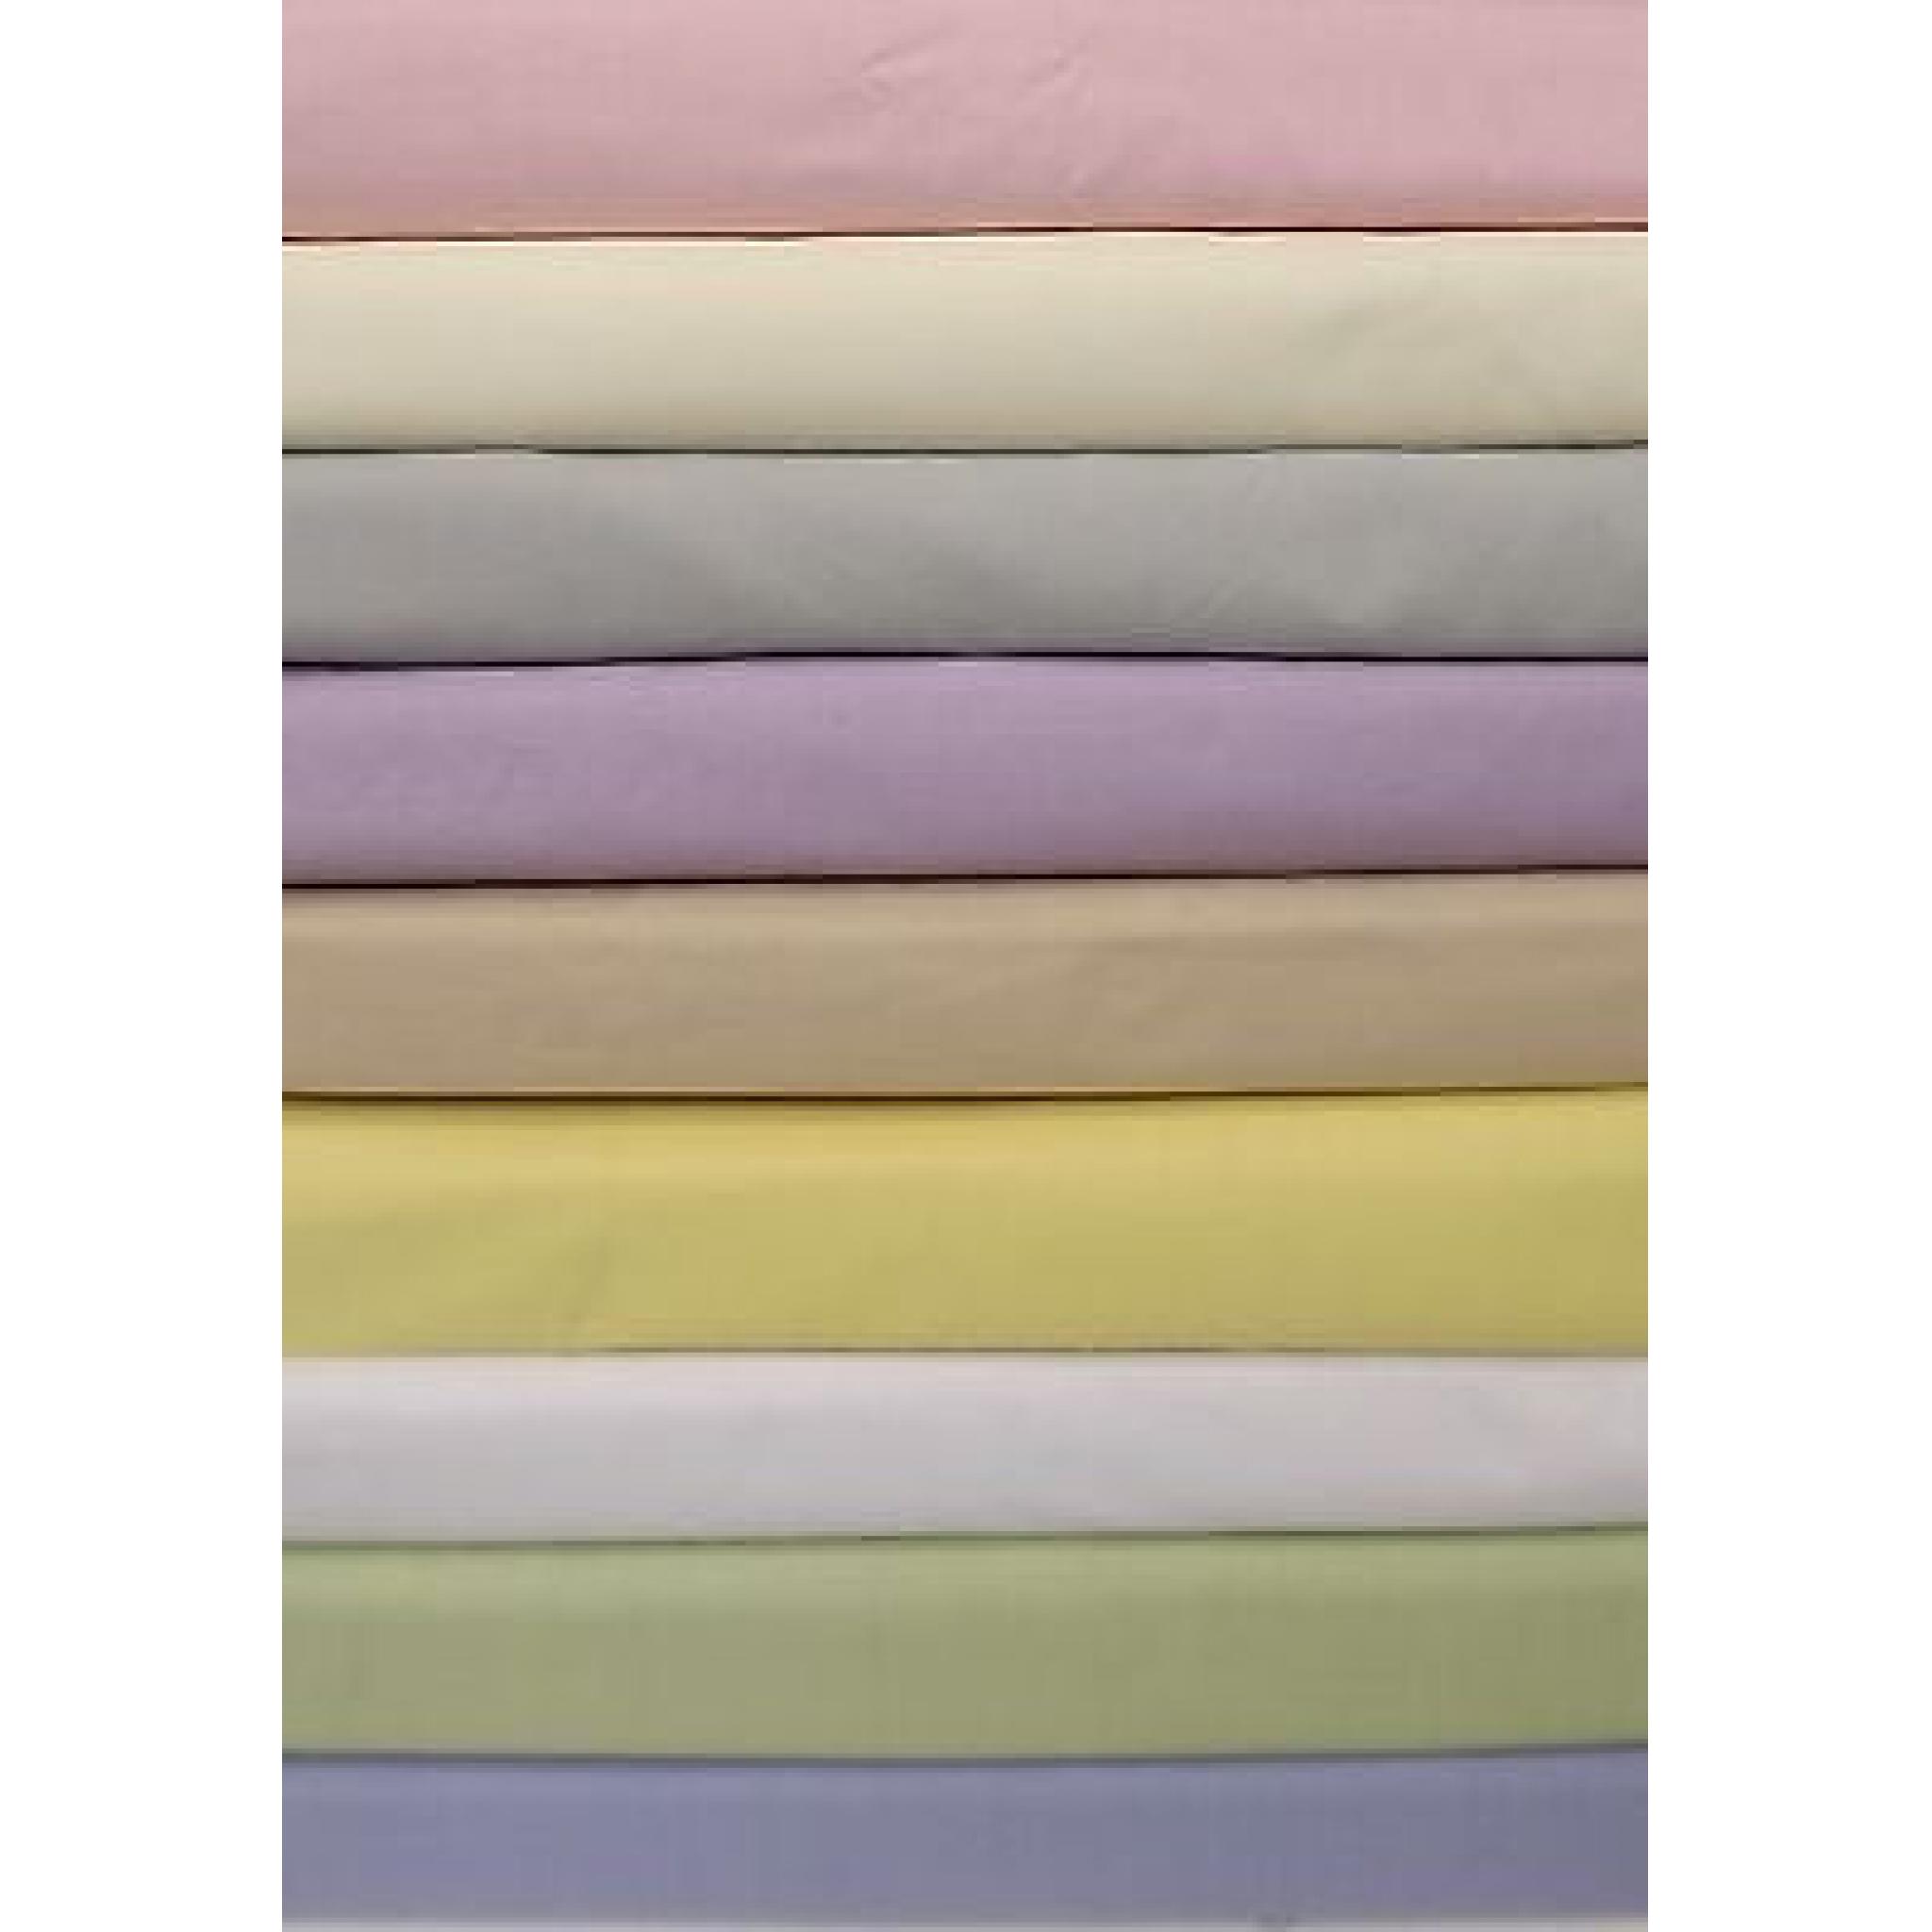 3' 6"x 7'bed fitted sheets 68pick pastels suitable for electric adjustable 